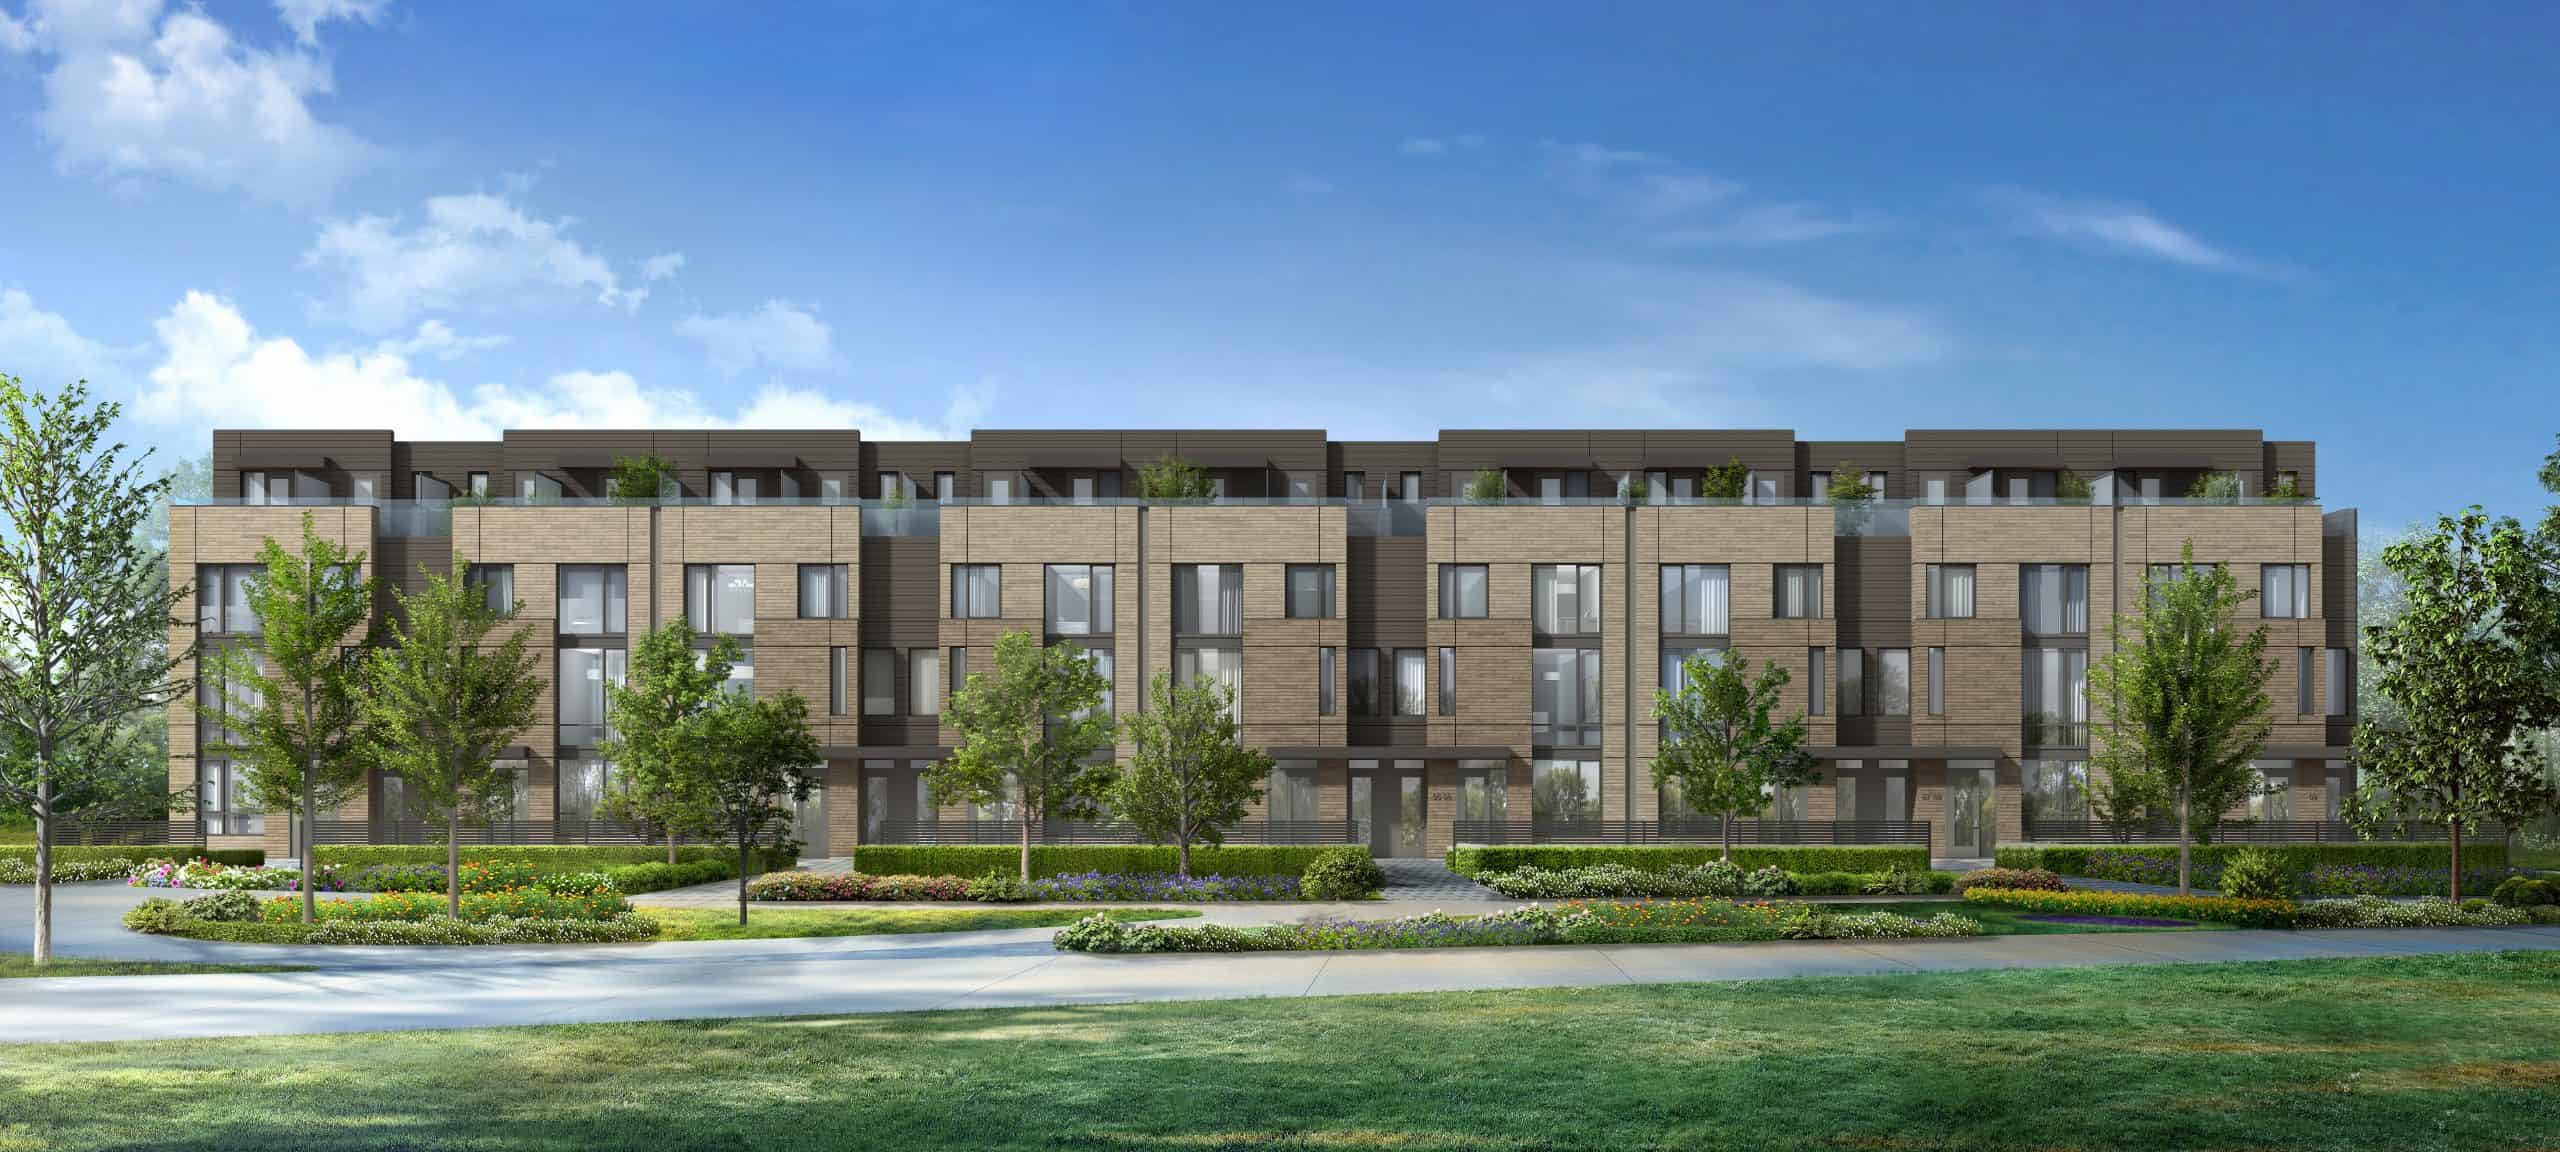 The New Lawrence Heights exterior image